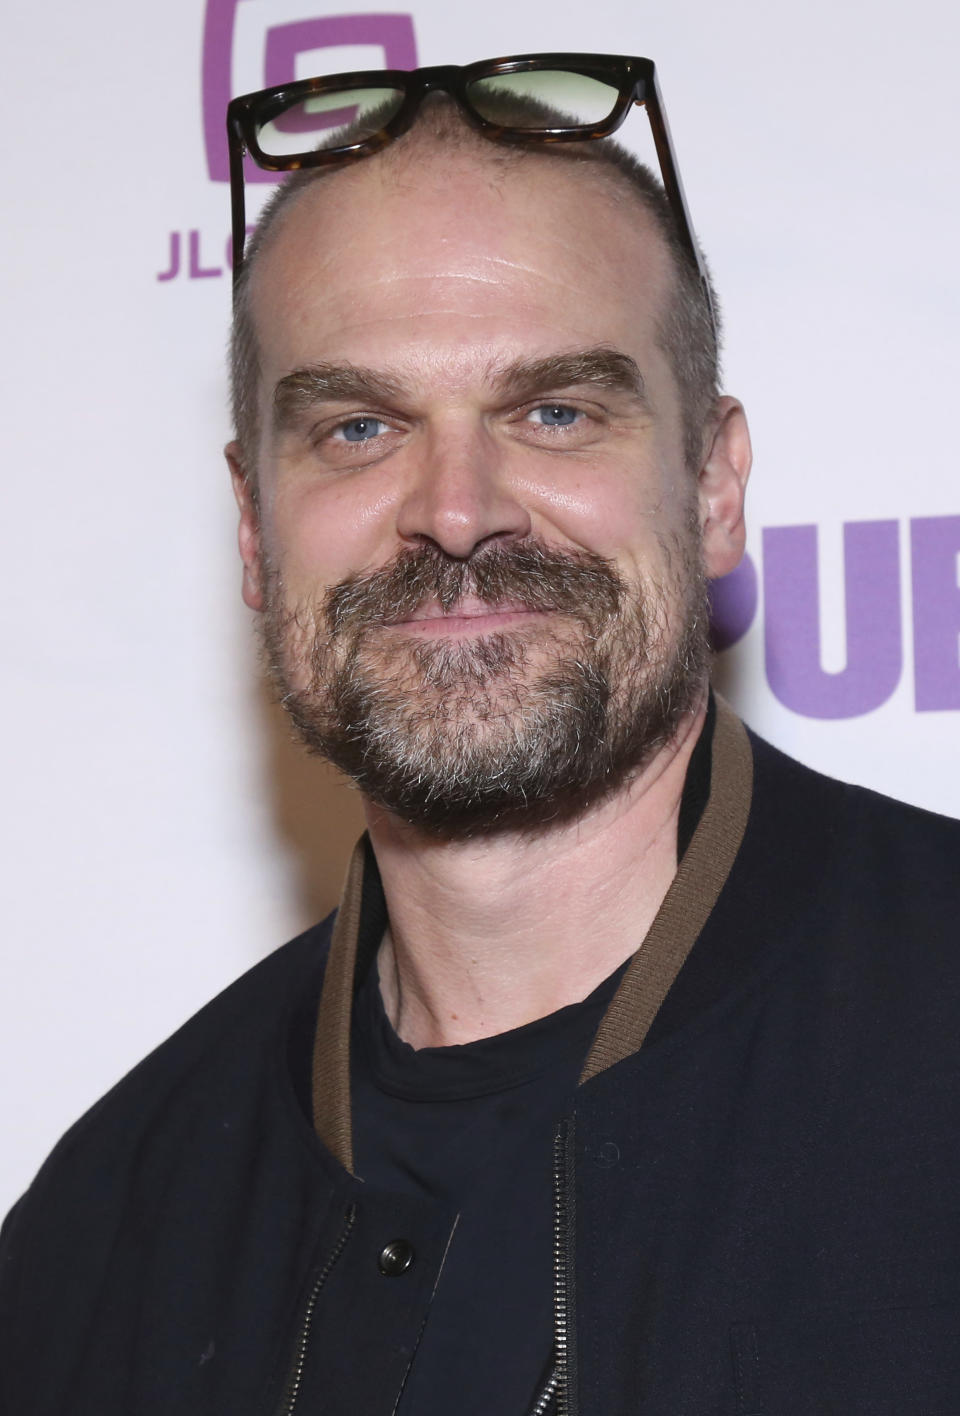 David Harbour at the 2021 Public Theater Gala at the Delacorte Theater - Credit: Joseph Marzullo/MediaPunch/IPx